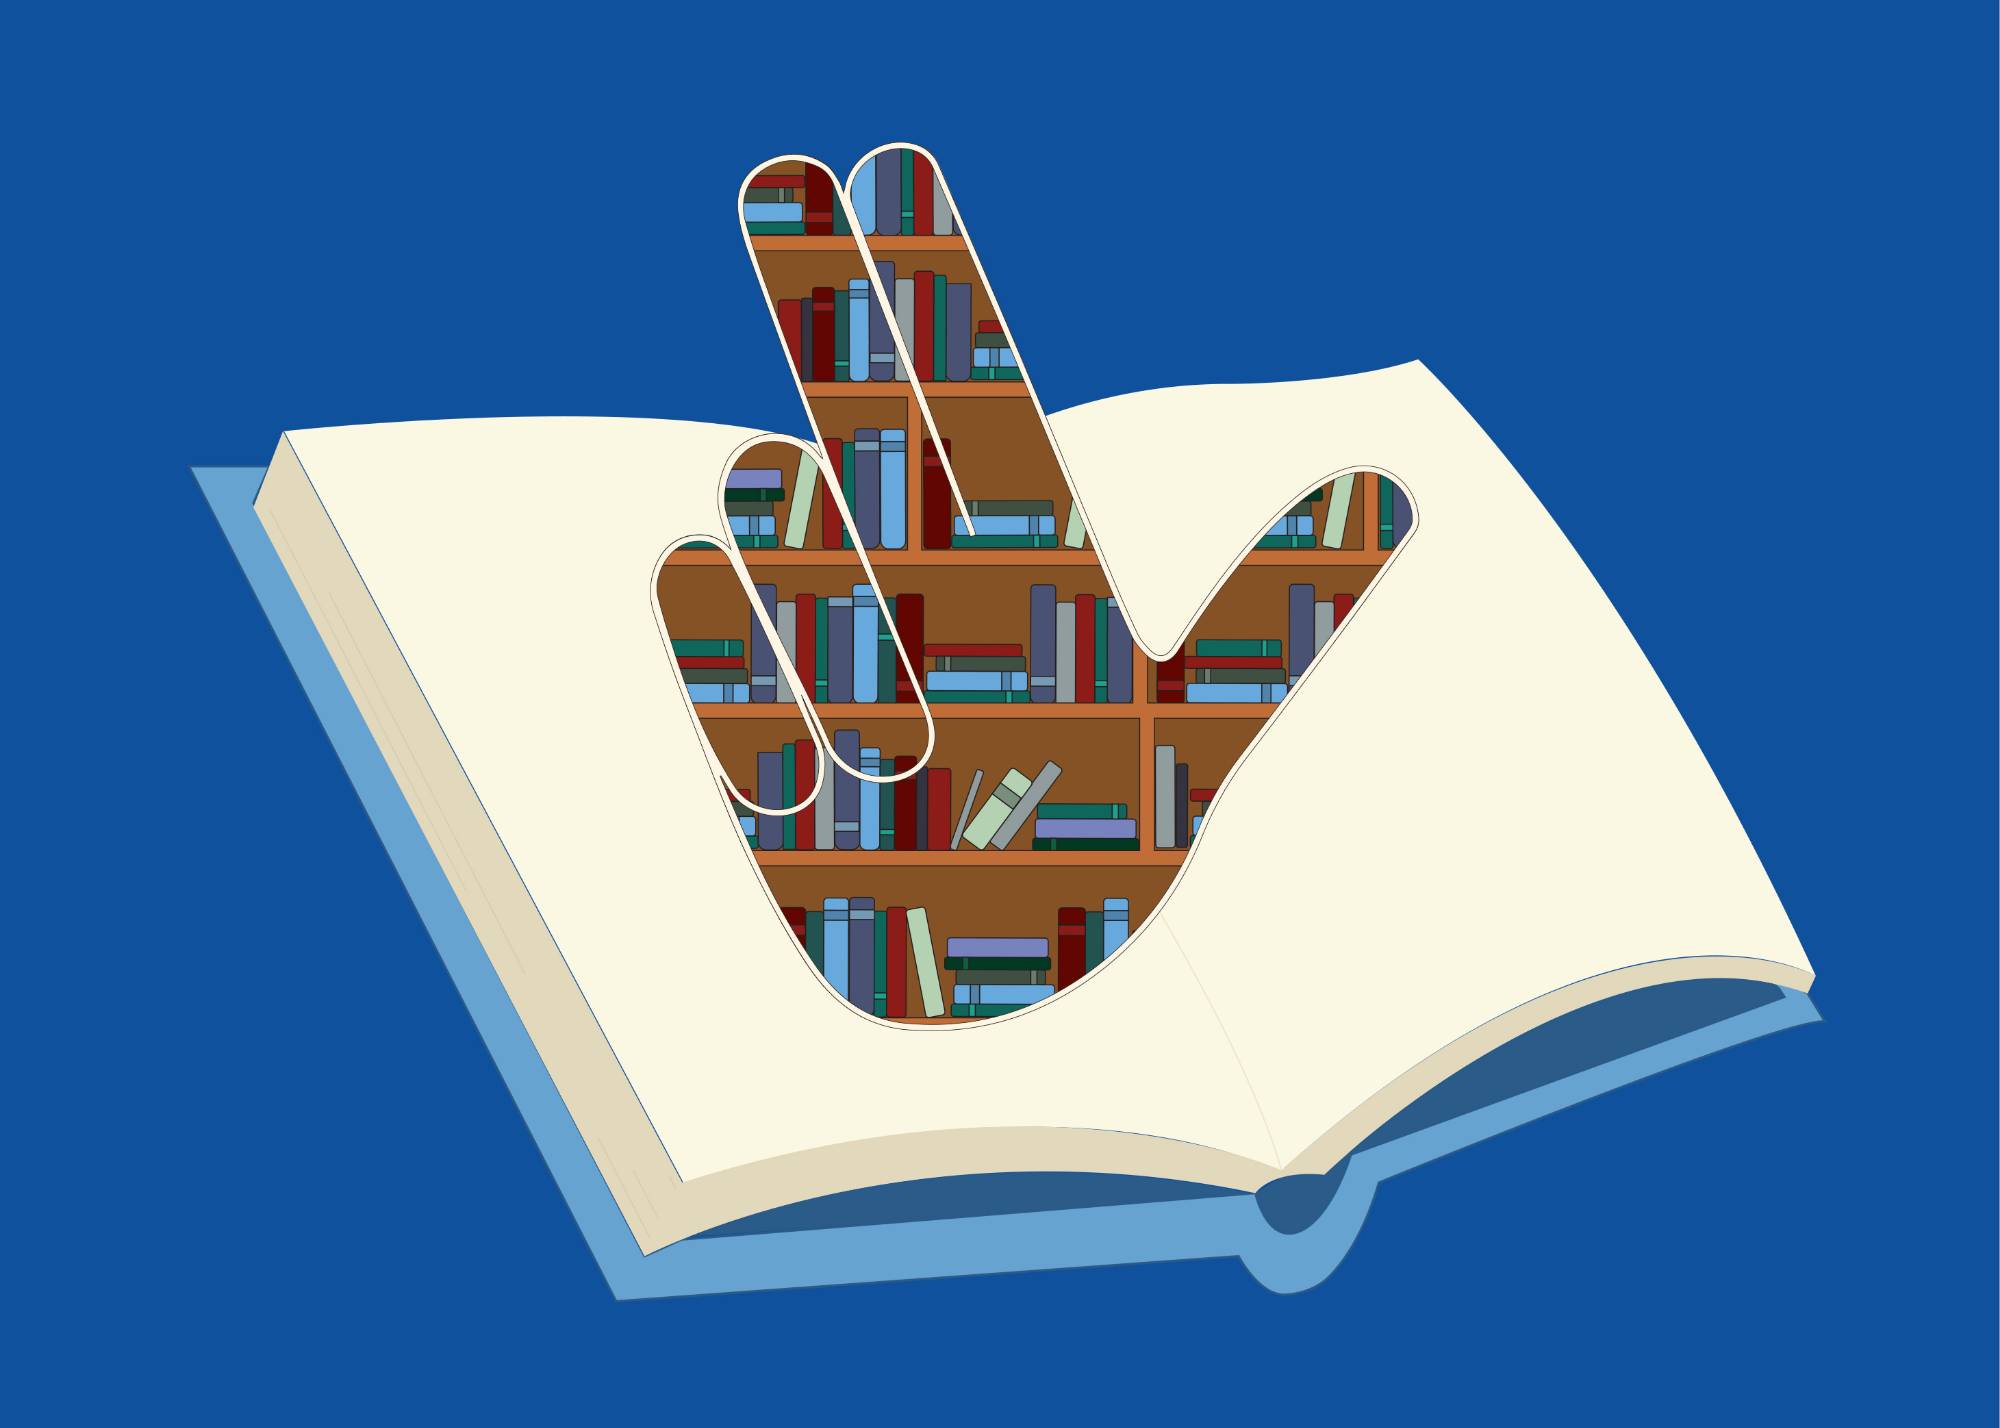 The Family Weekend 2019 logo. The "anchor up" hand sign made out of a bookshelf atop an illustration of an open book.